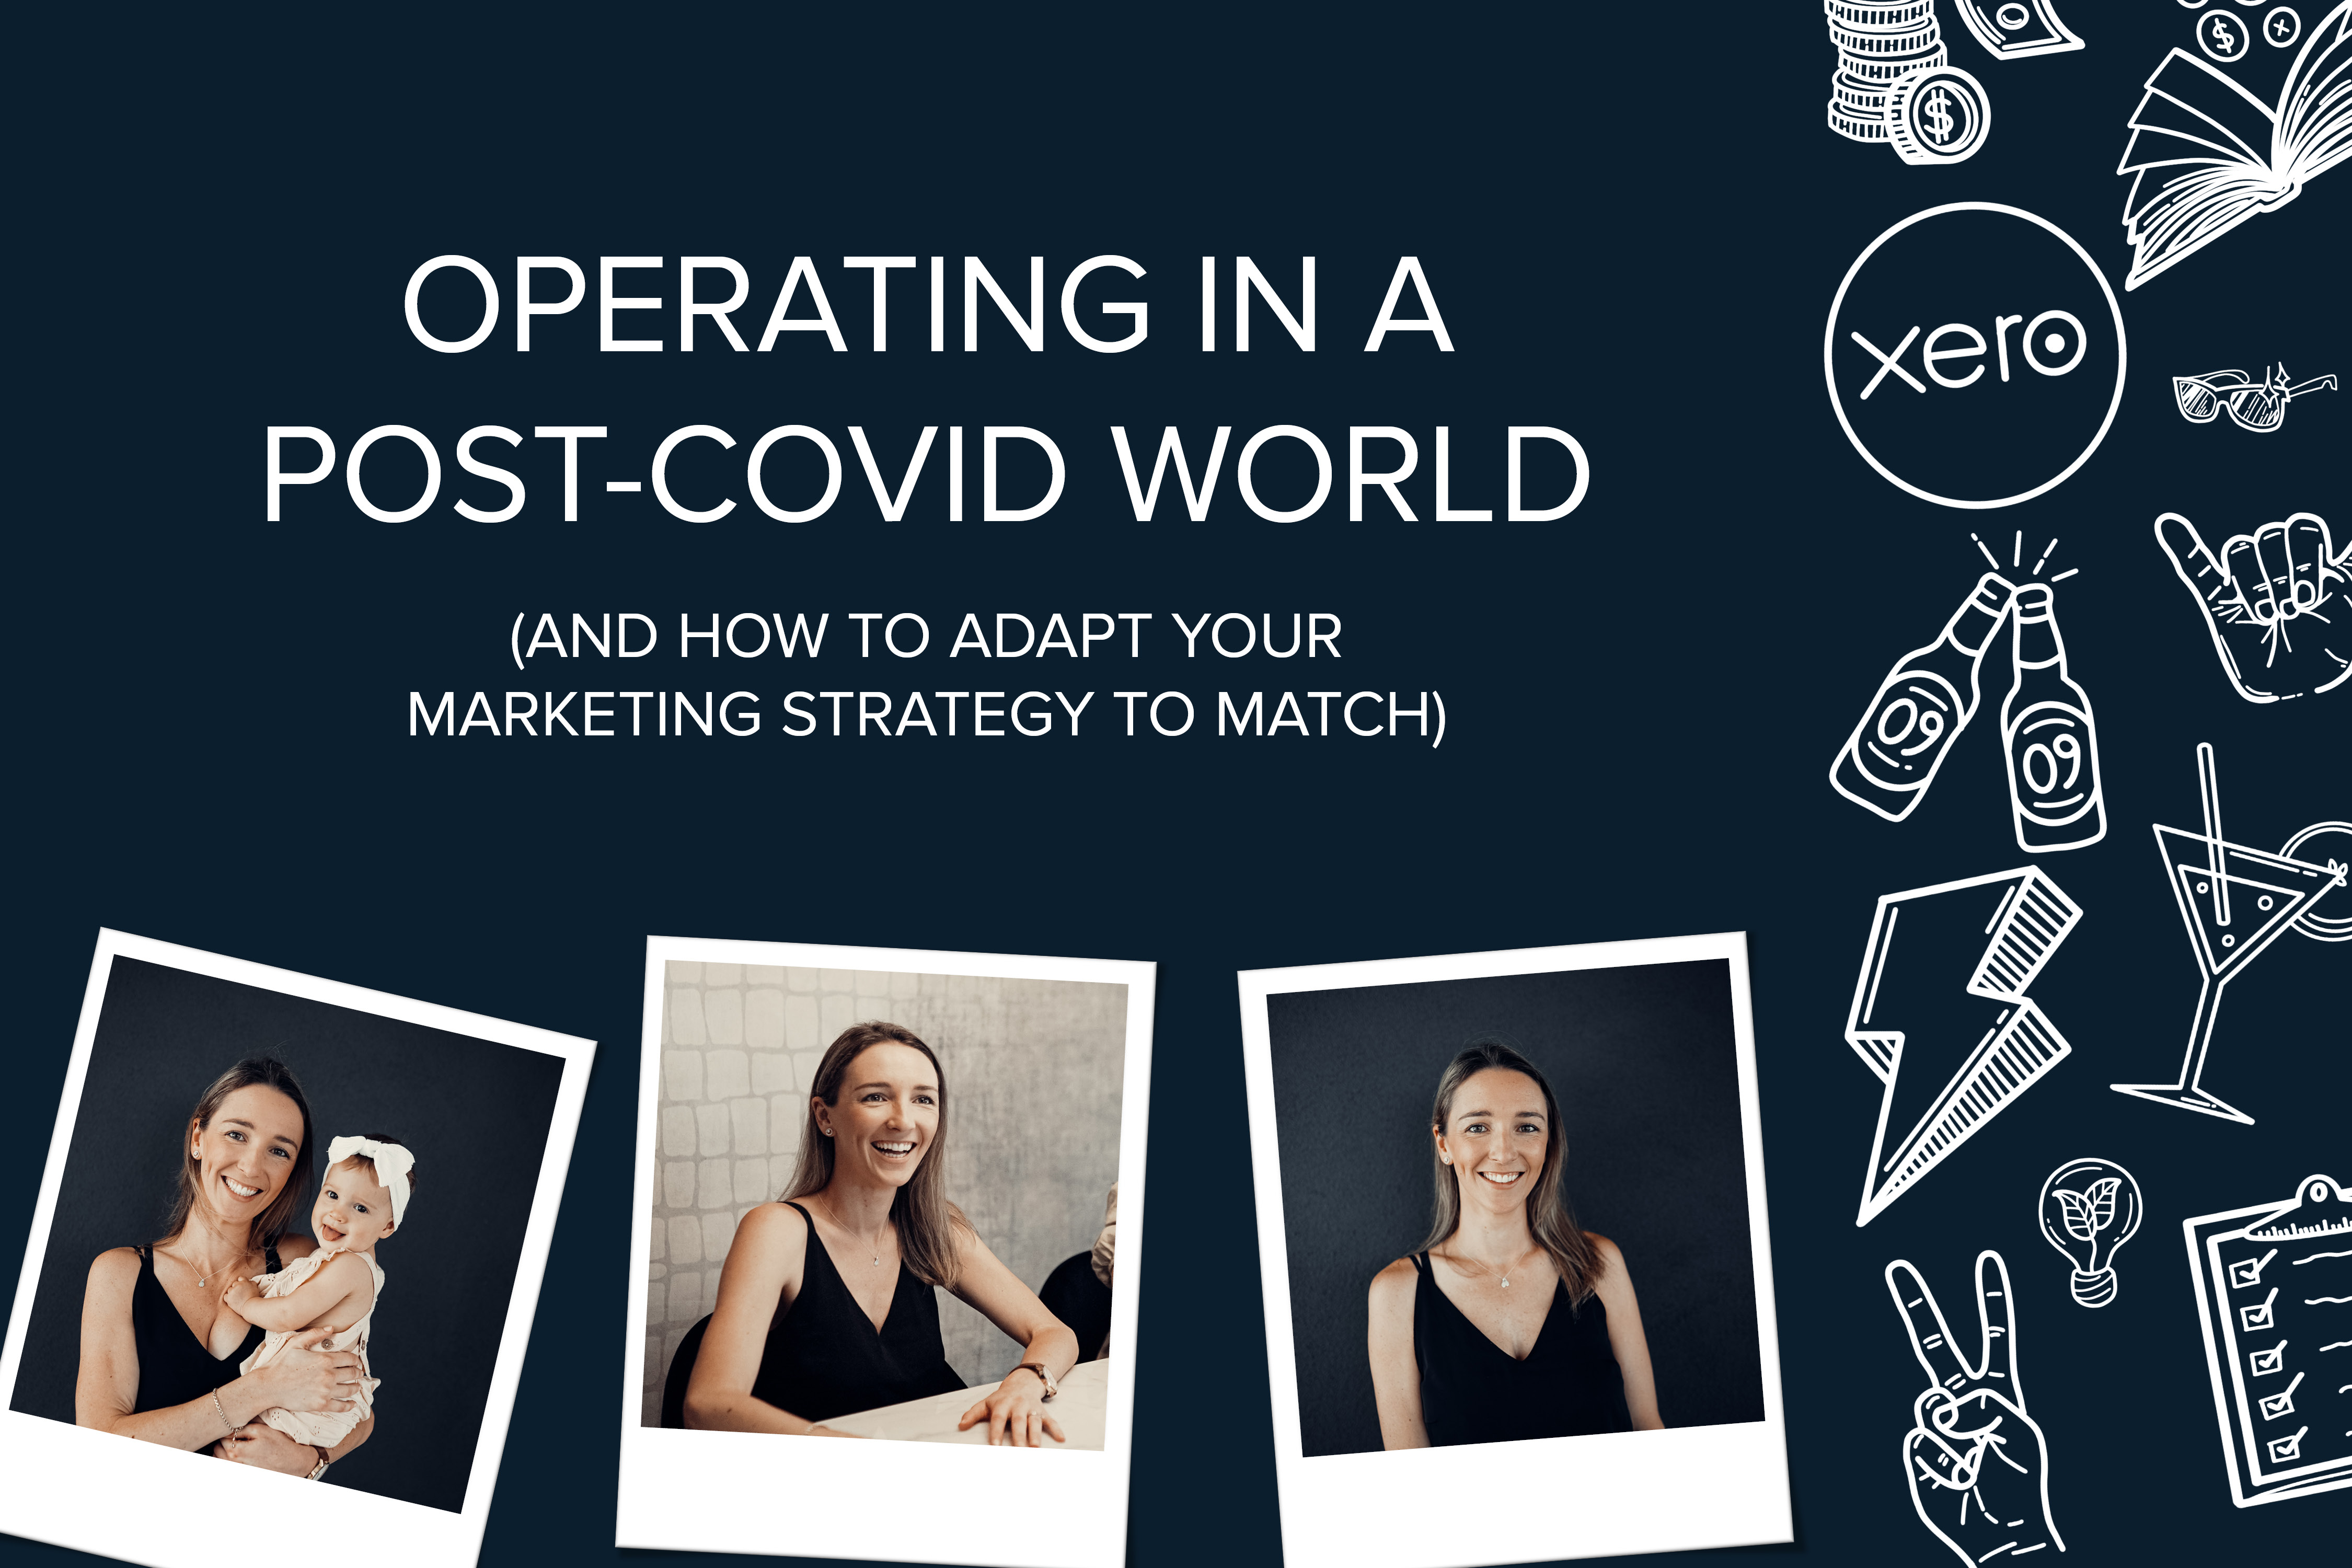 5 Questions to ask yourself when scaling your Post-Covid Marketing Efforts